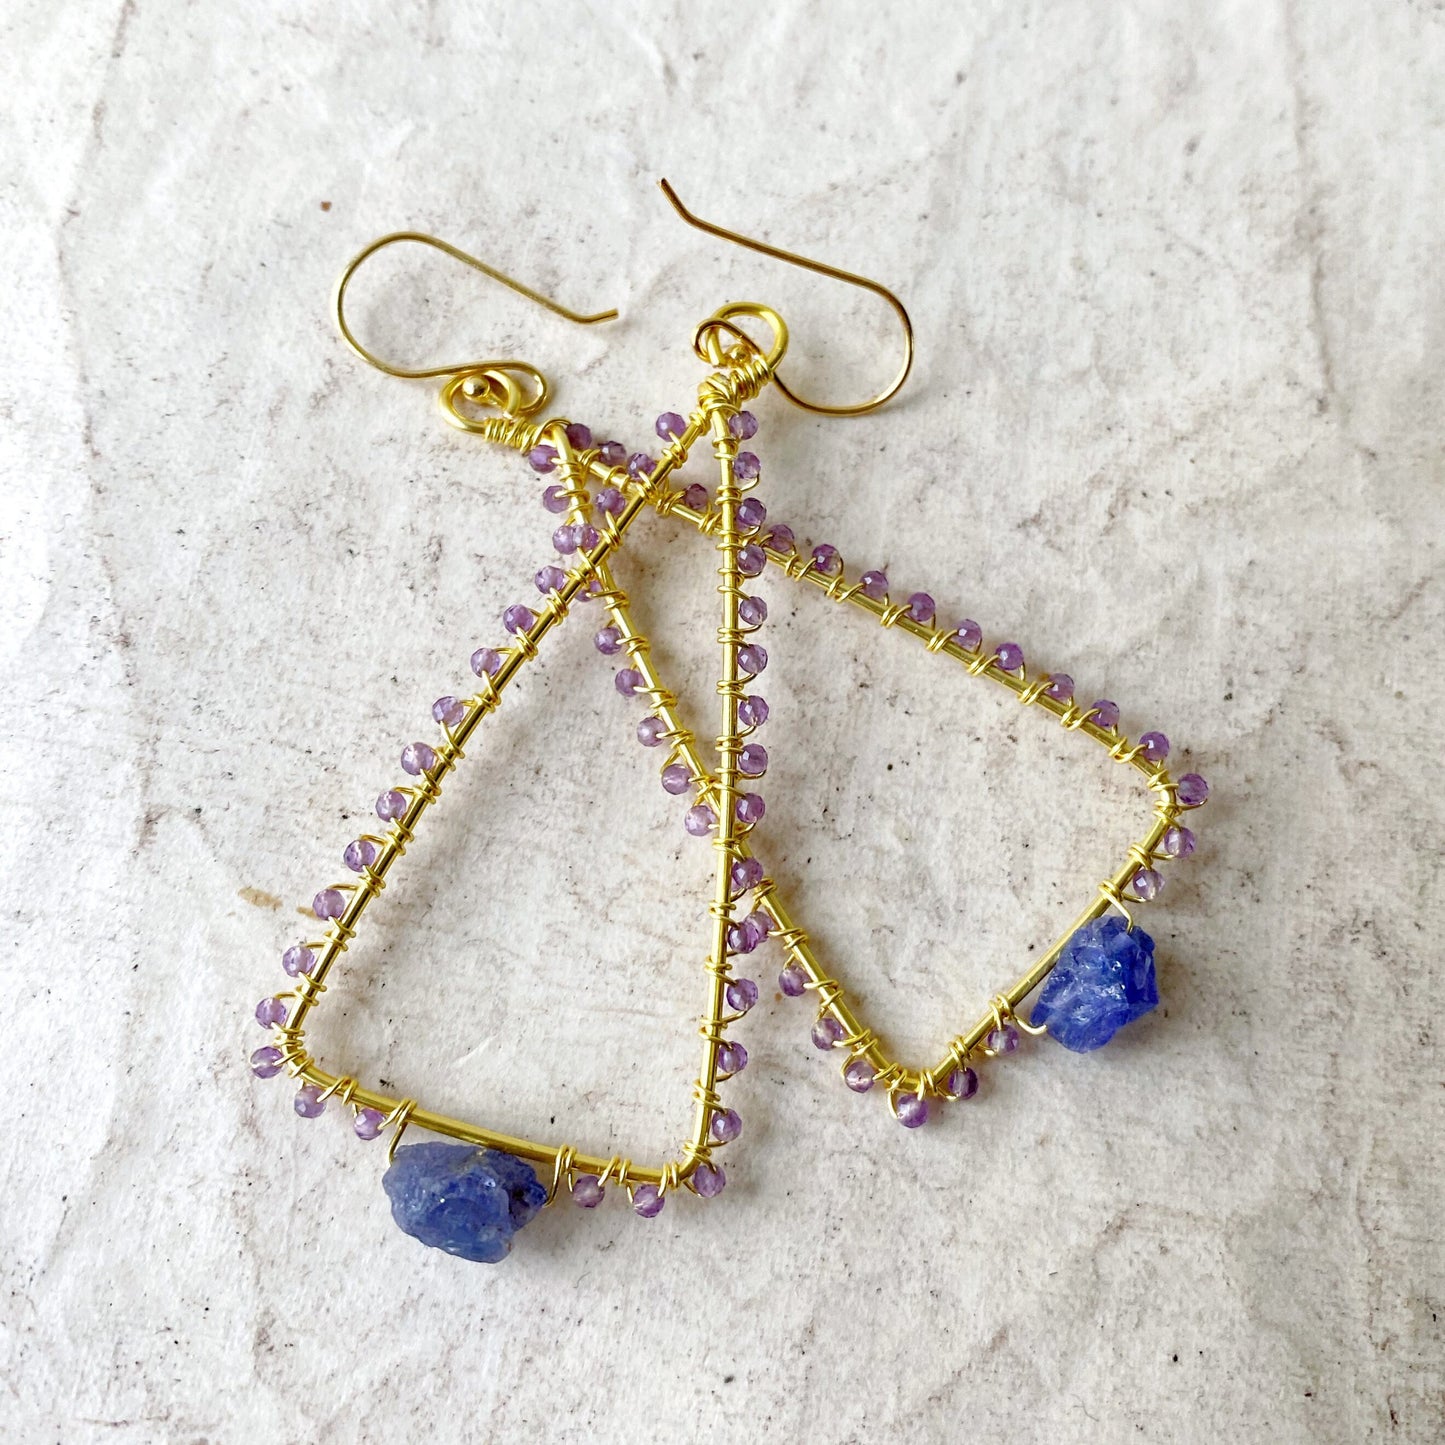 Tanzanite and Amethyst triangle earrings in gold